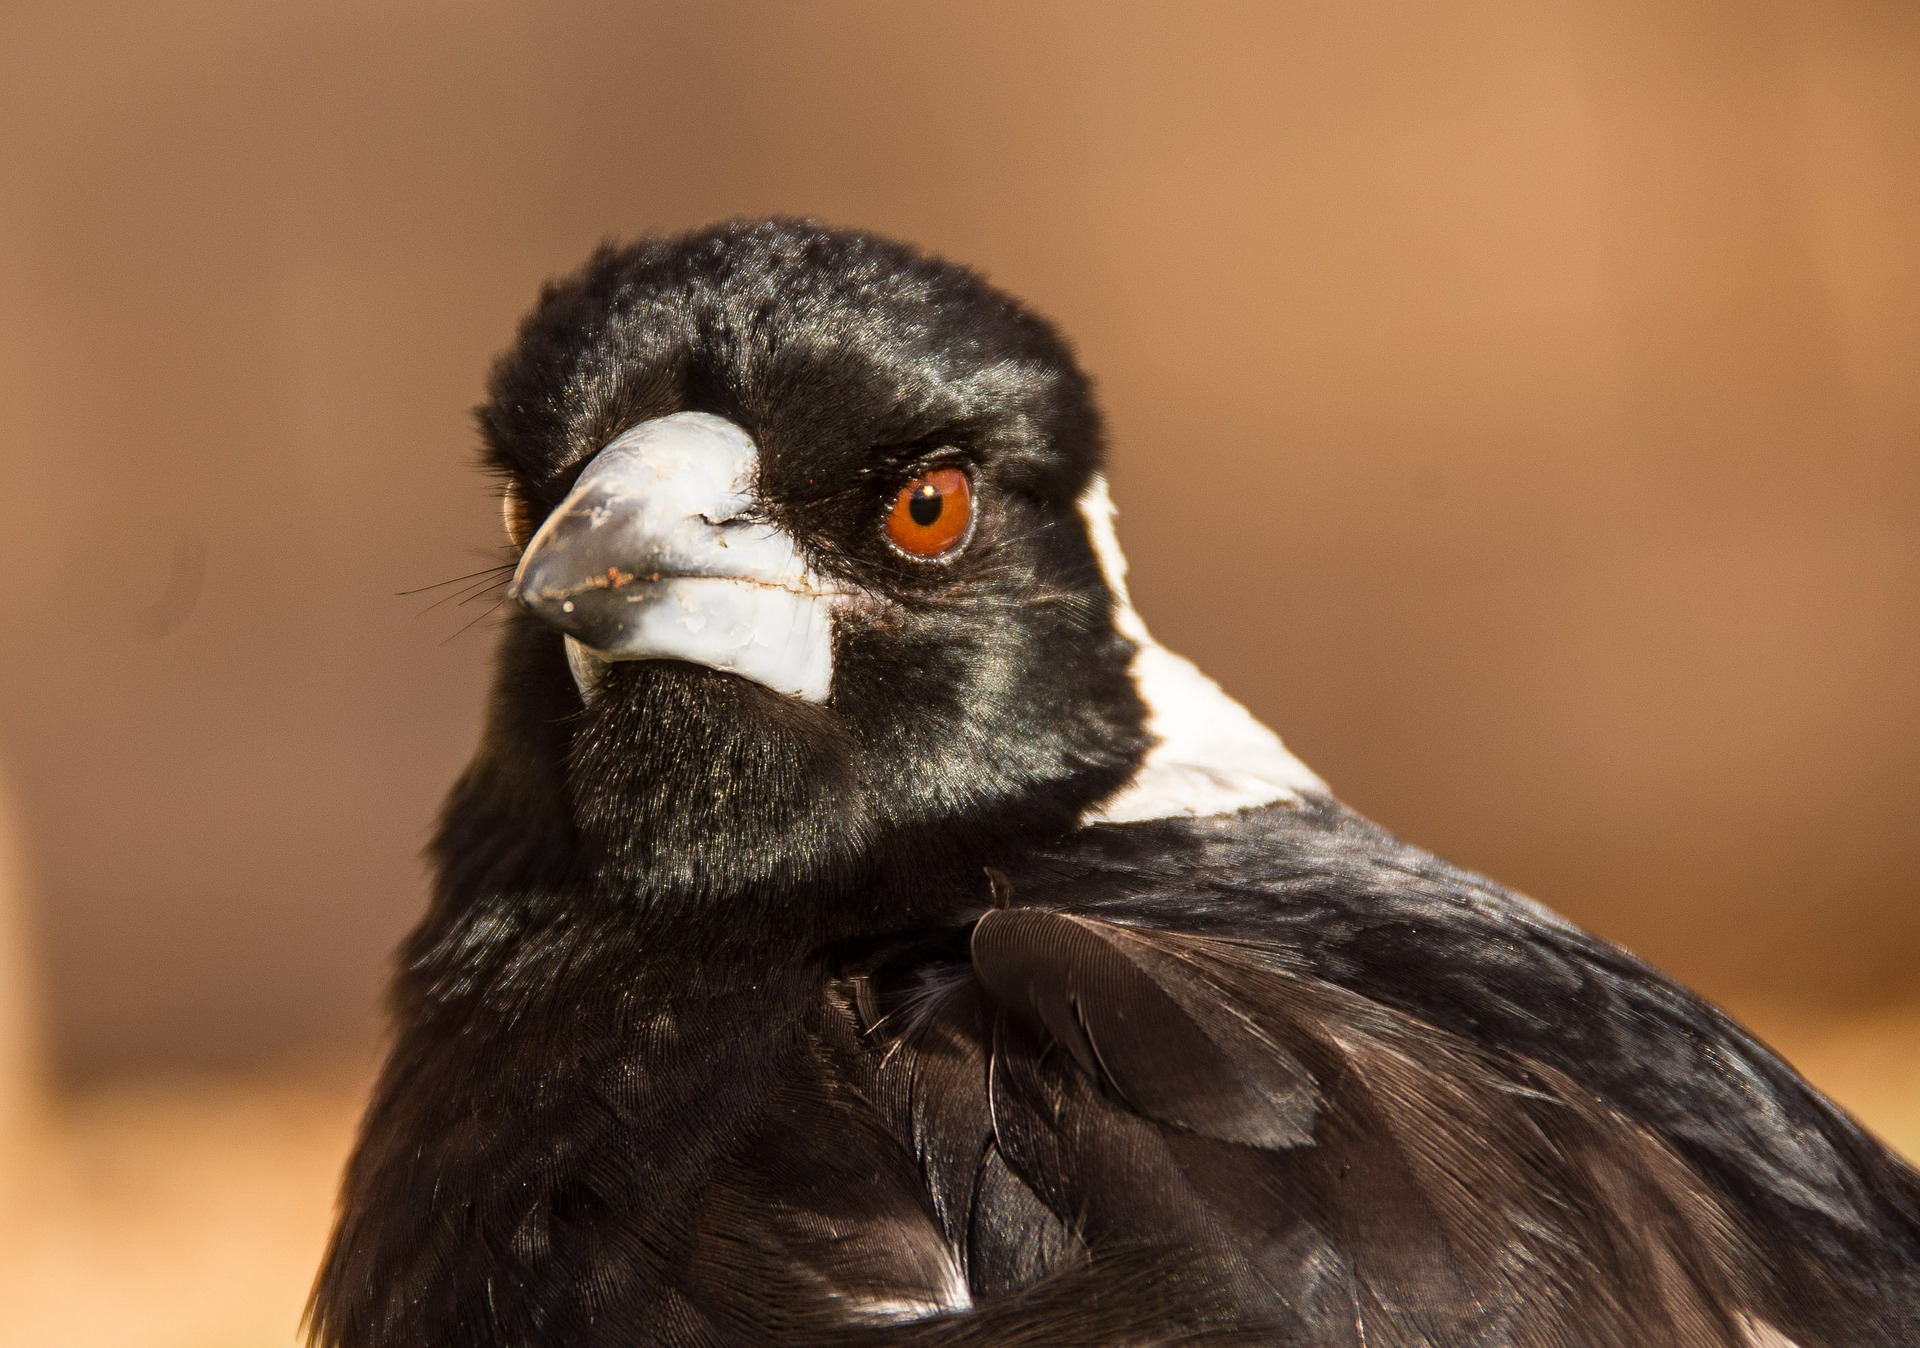 Magpie Swooping: How to Avoid Getting Hit